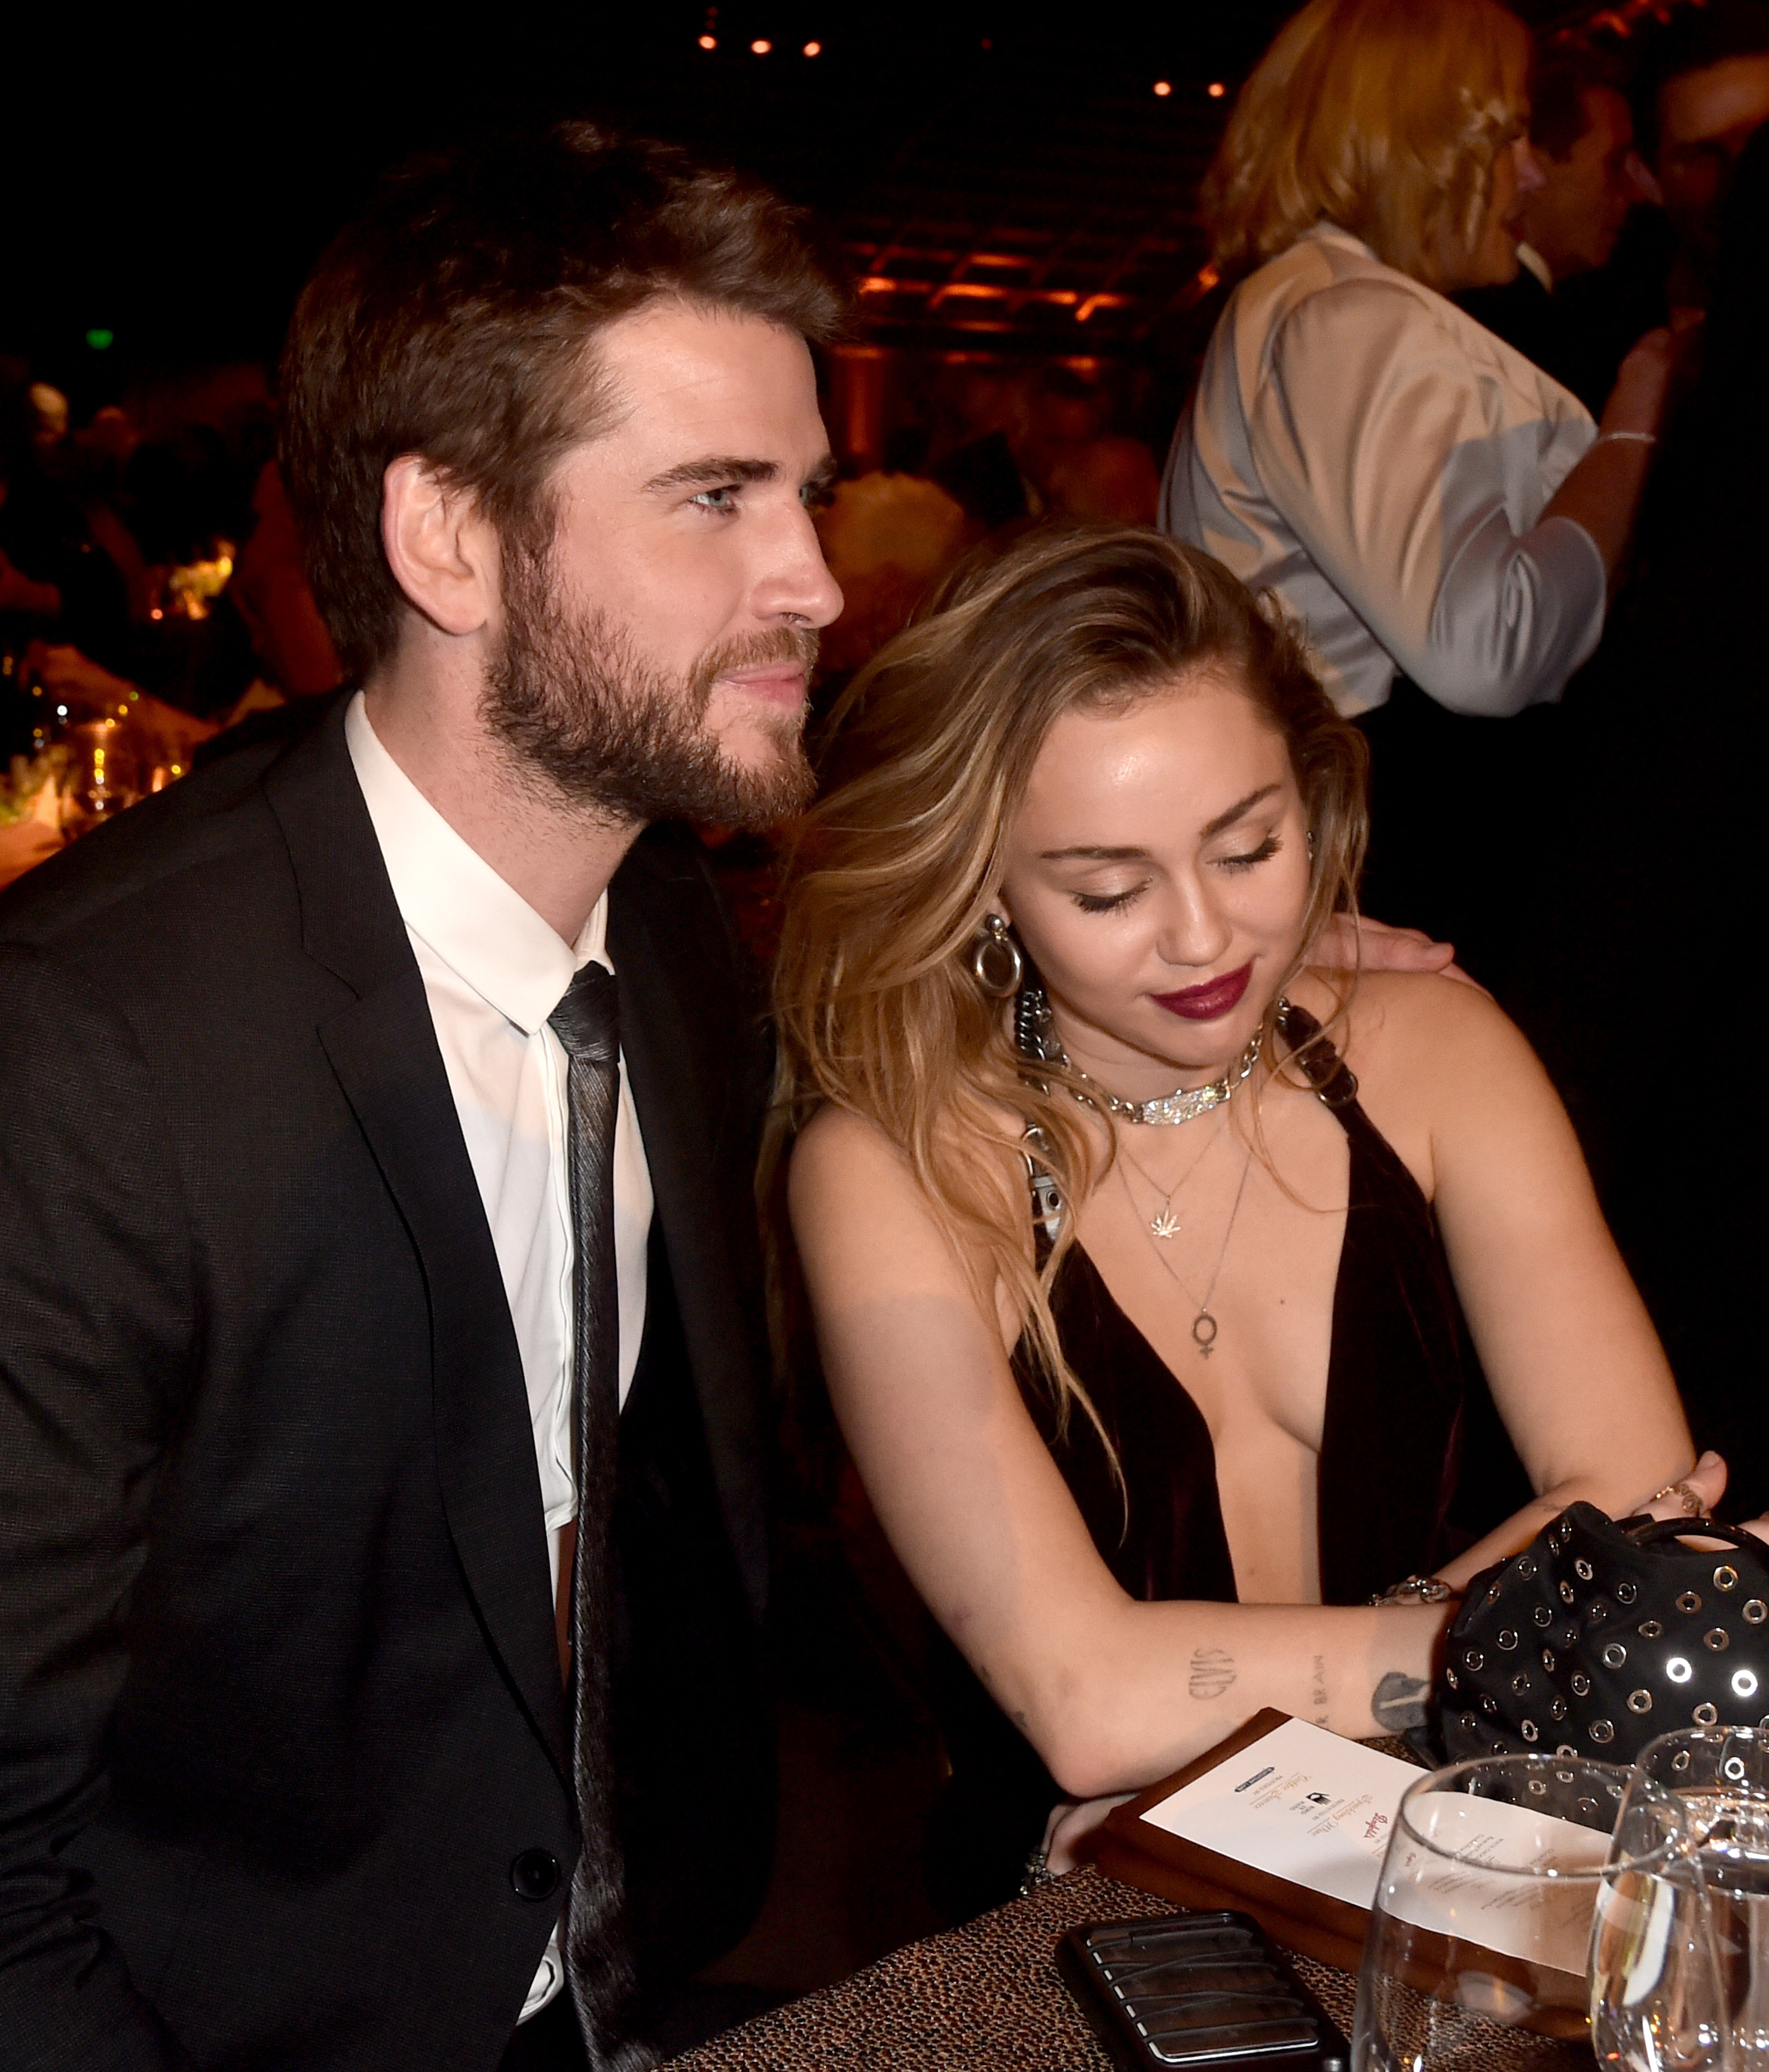 Liam Hemsworth and Miley Cyrus attend the 16th annual G'Day USA Los Angeles Gala at 3LABS on January 26, 2019 in Culver City, California. | Photo: Getty Images